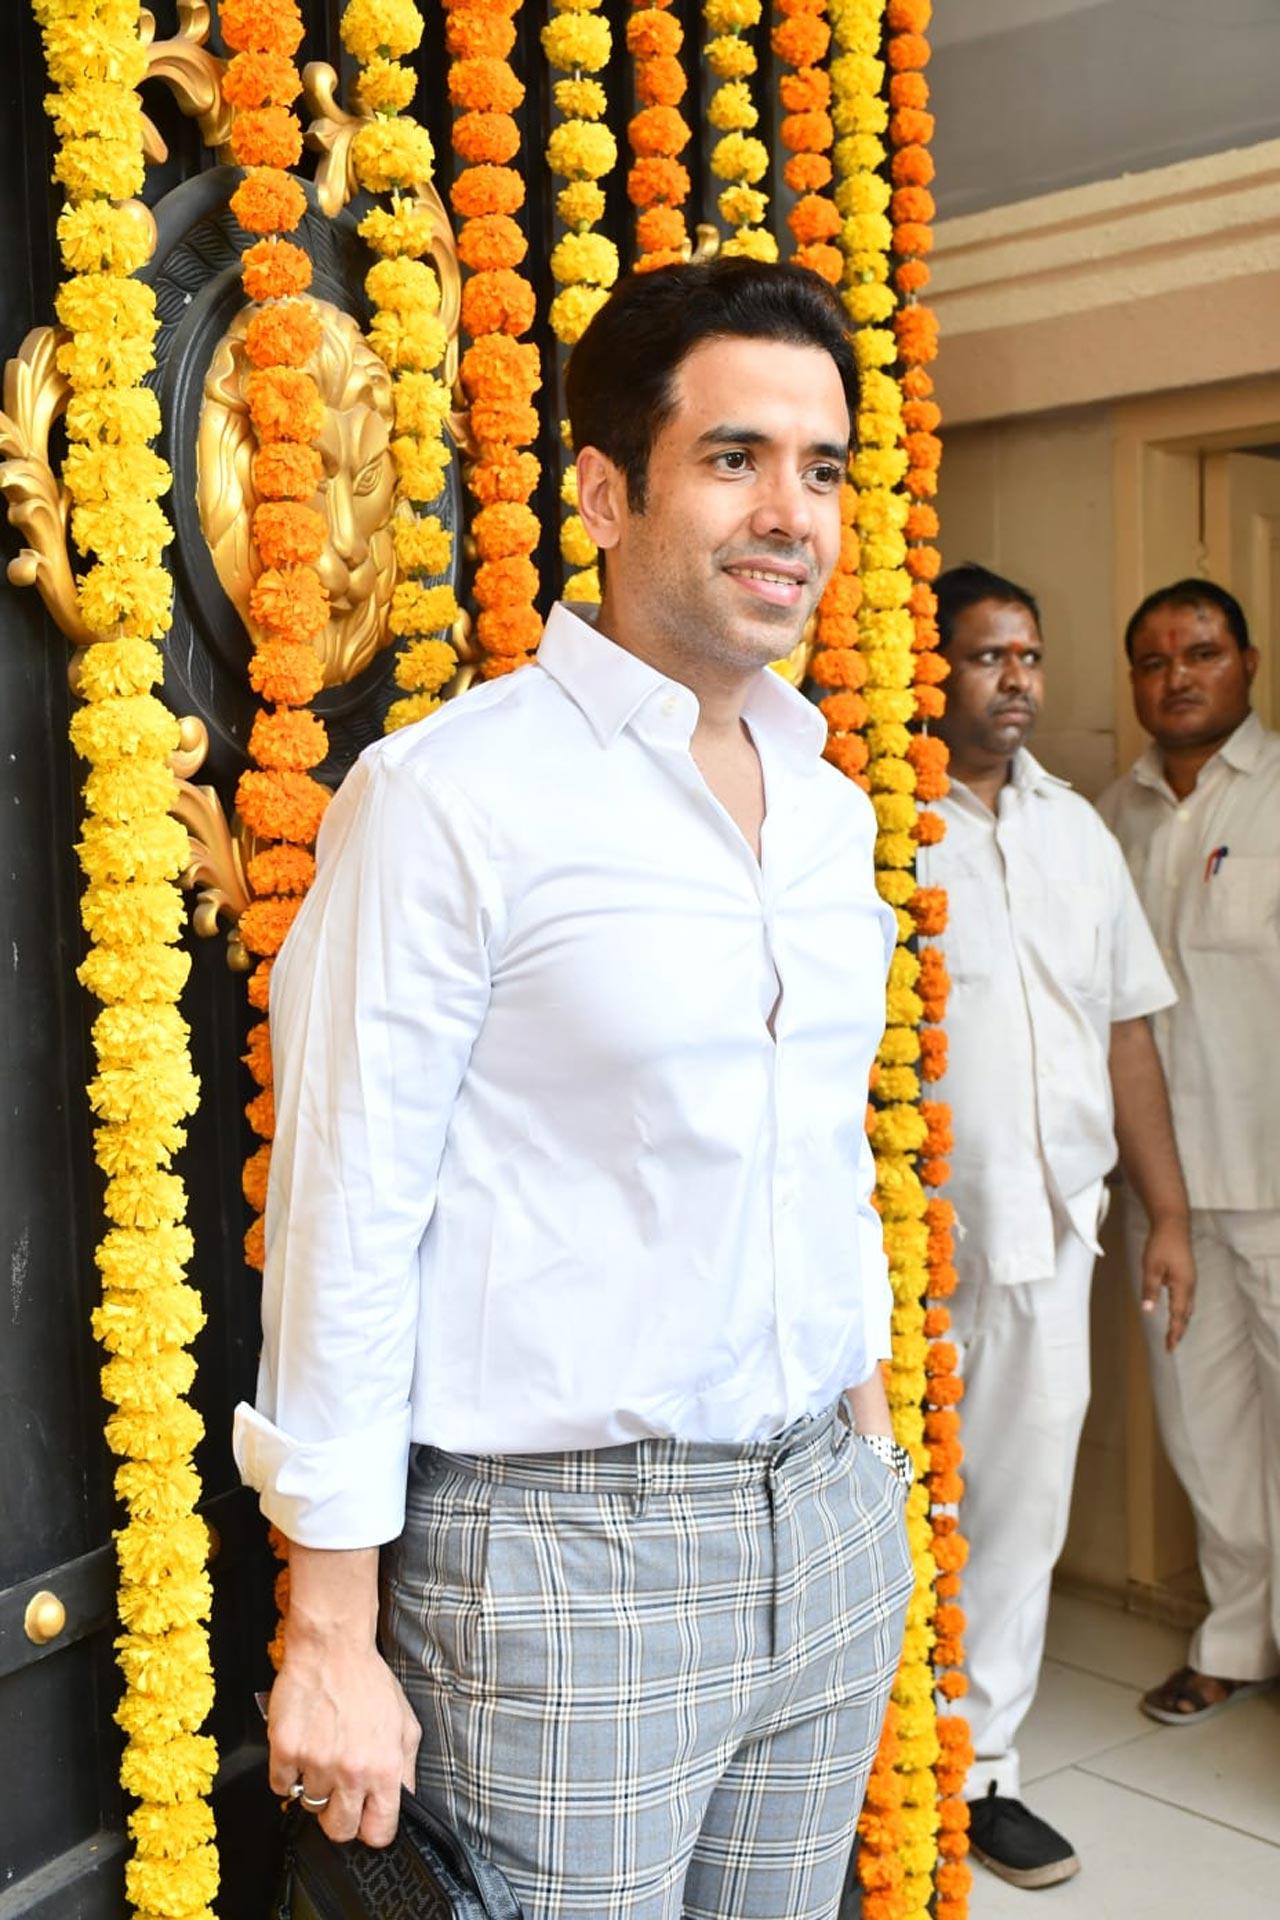 Tusshar Kapoor posed for the paparazzi as he arrived at the brunch celebration